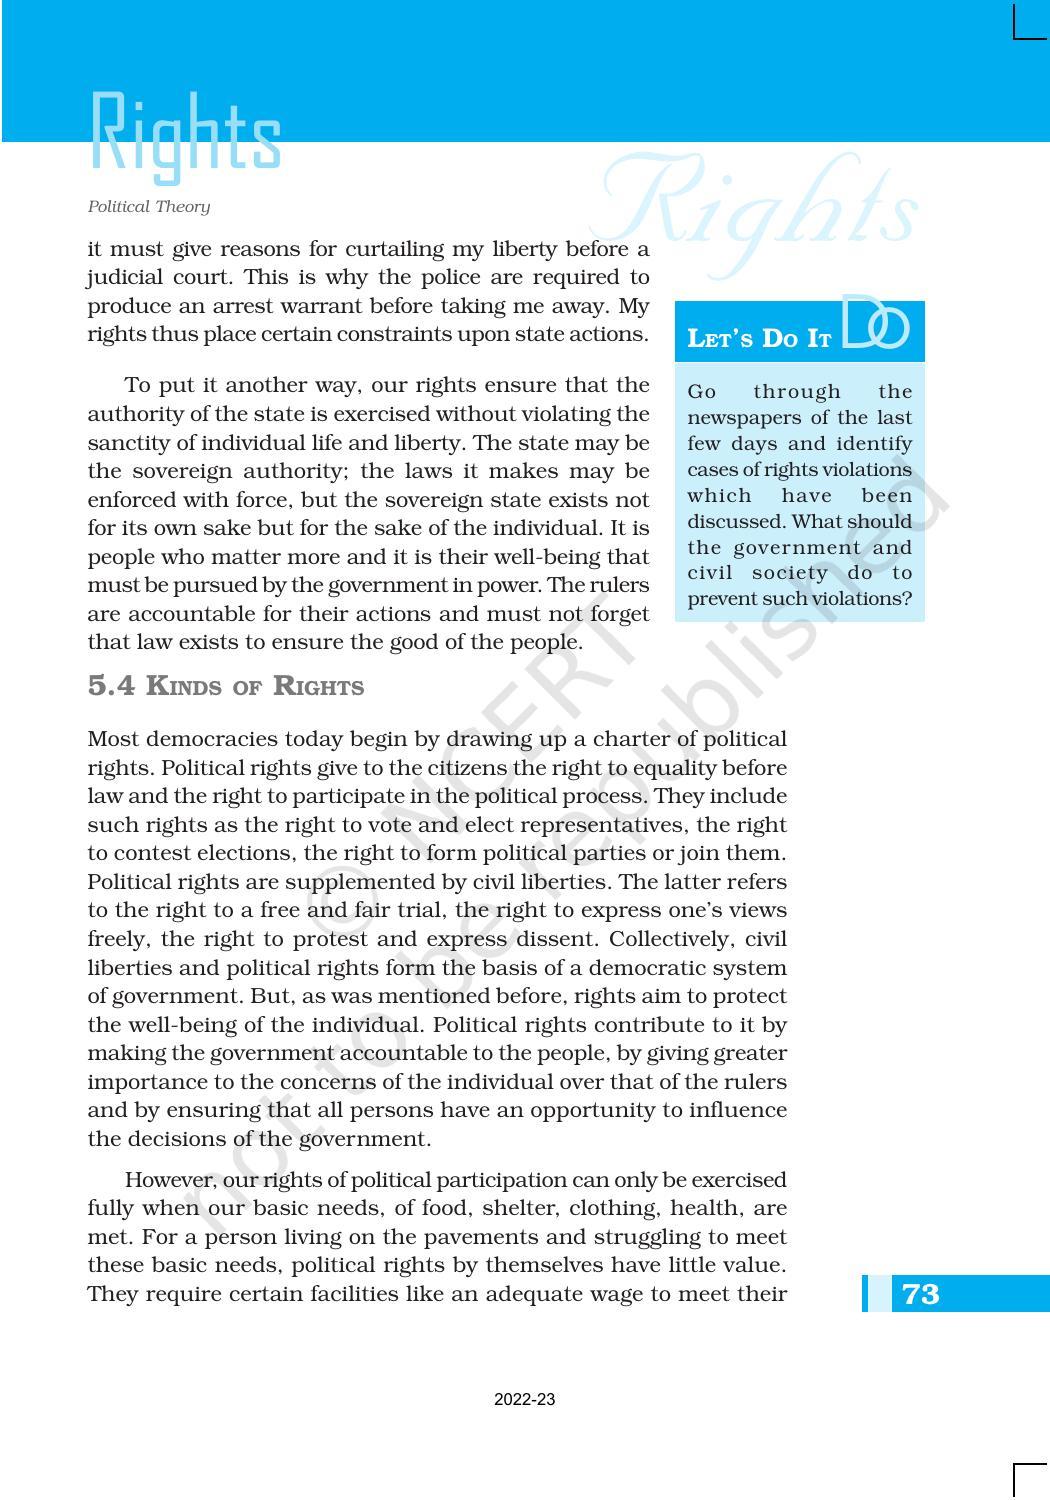 NCERT Book for Class 11 Political Science (Political Theory) Chapter 5 Rights - Page 7